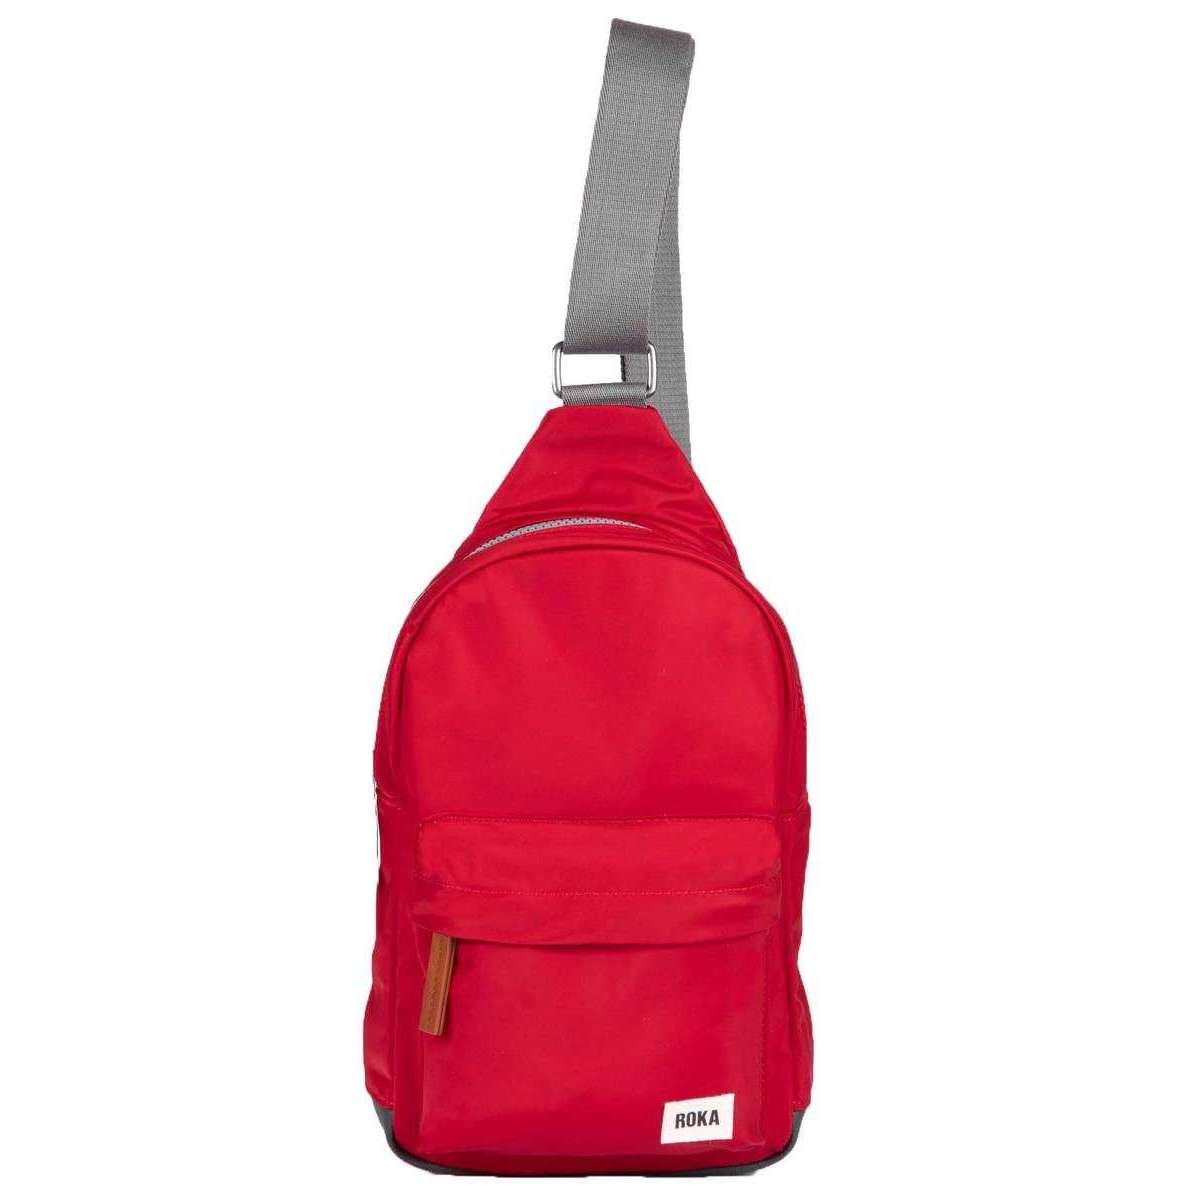 Roka Willesden B Sustainable Nylon Scooter Bag - Cranberry Red